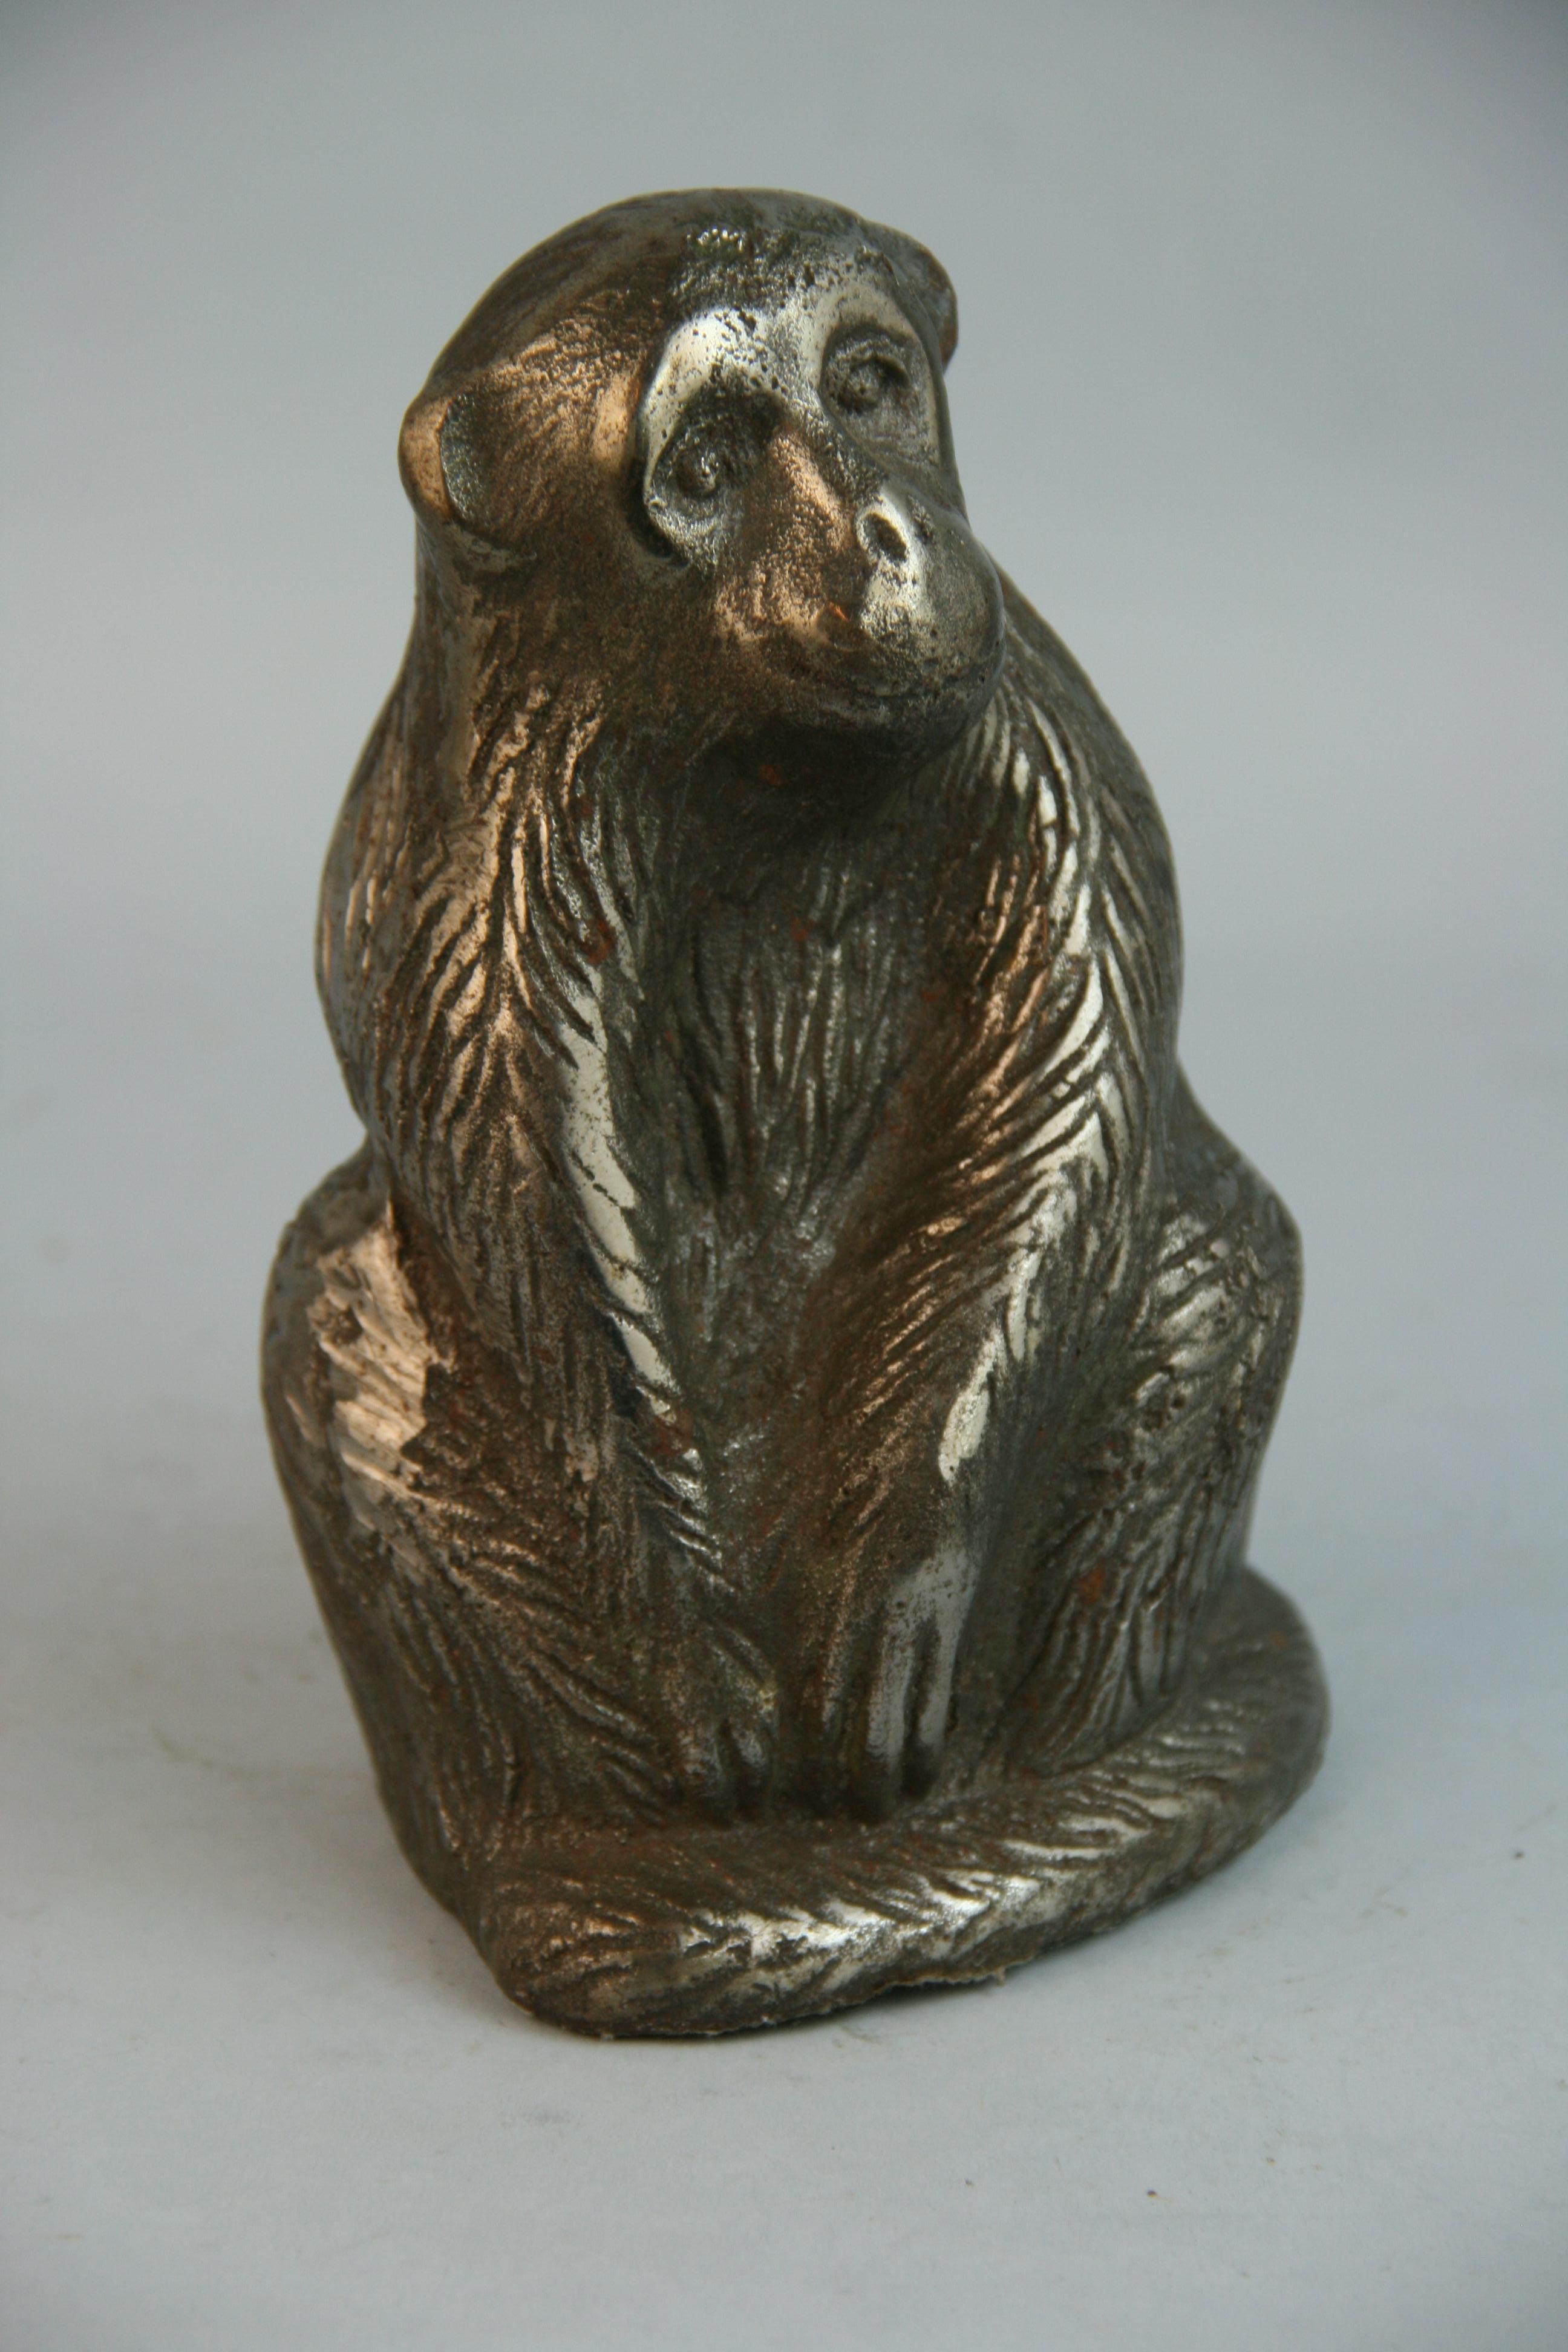 1217 Heavy silvered cast iron finely detailed monkey sculpture / paperweight.